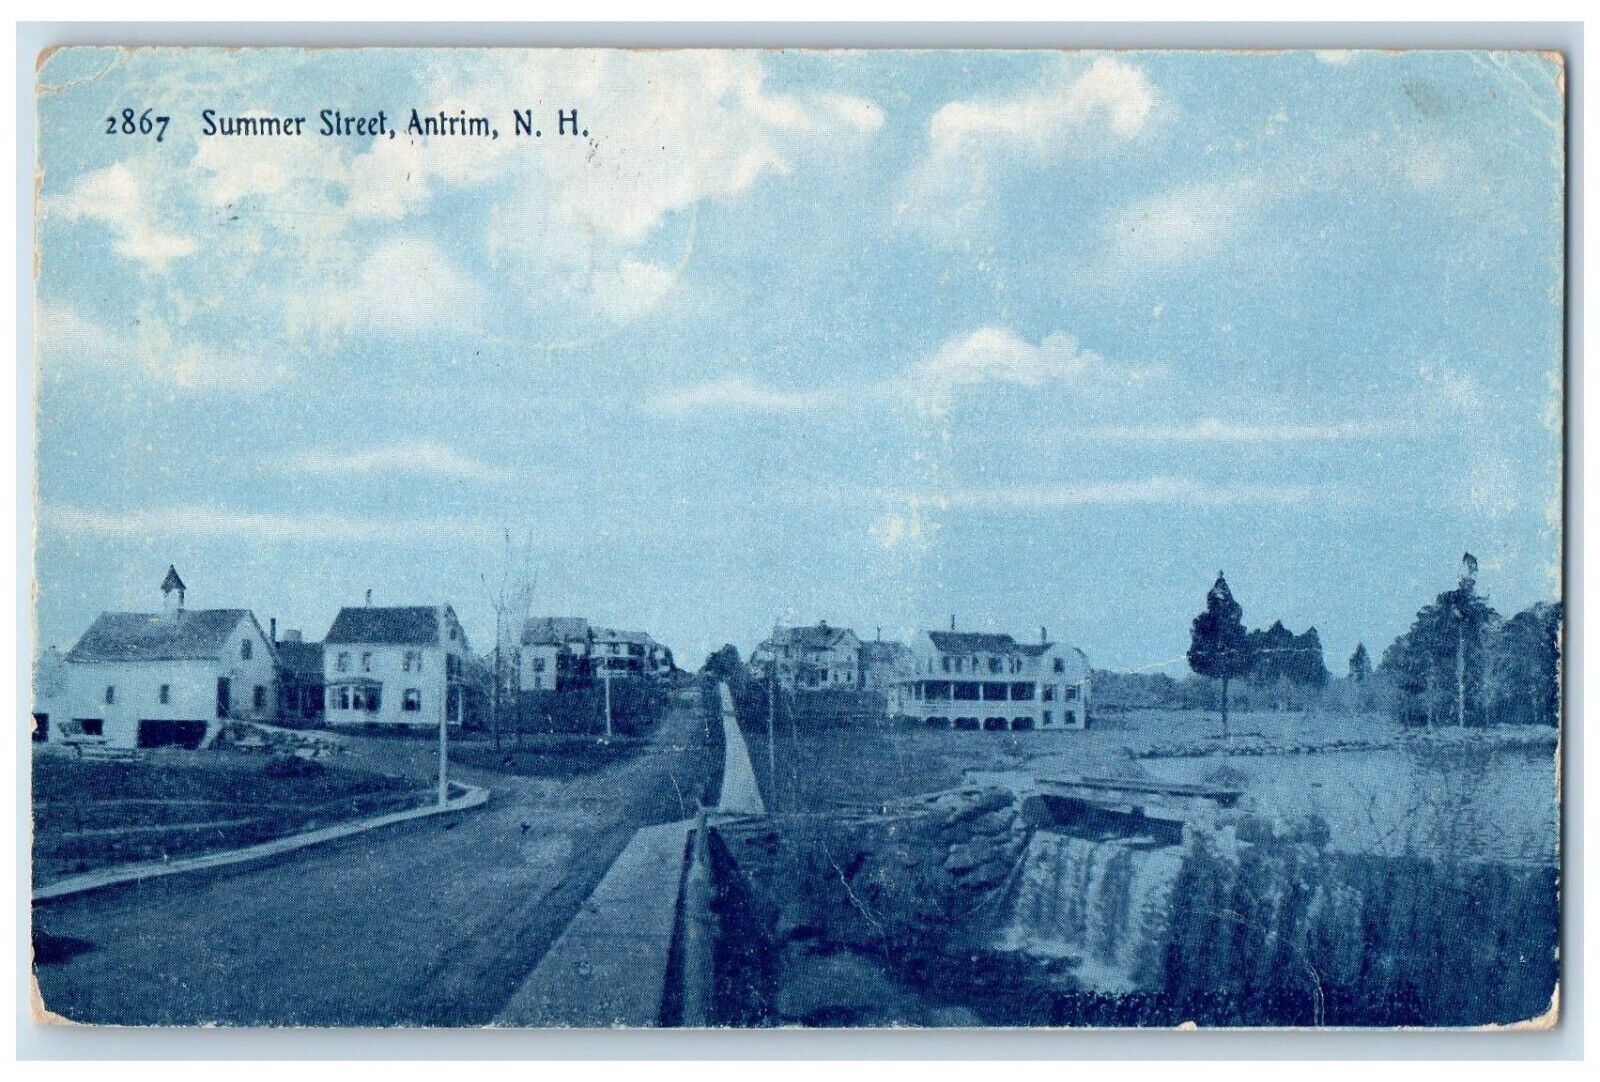 1910 Scene at Summer Street Antrim New Hampshire NH Posted Antique Postcard